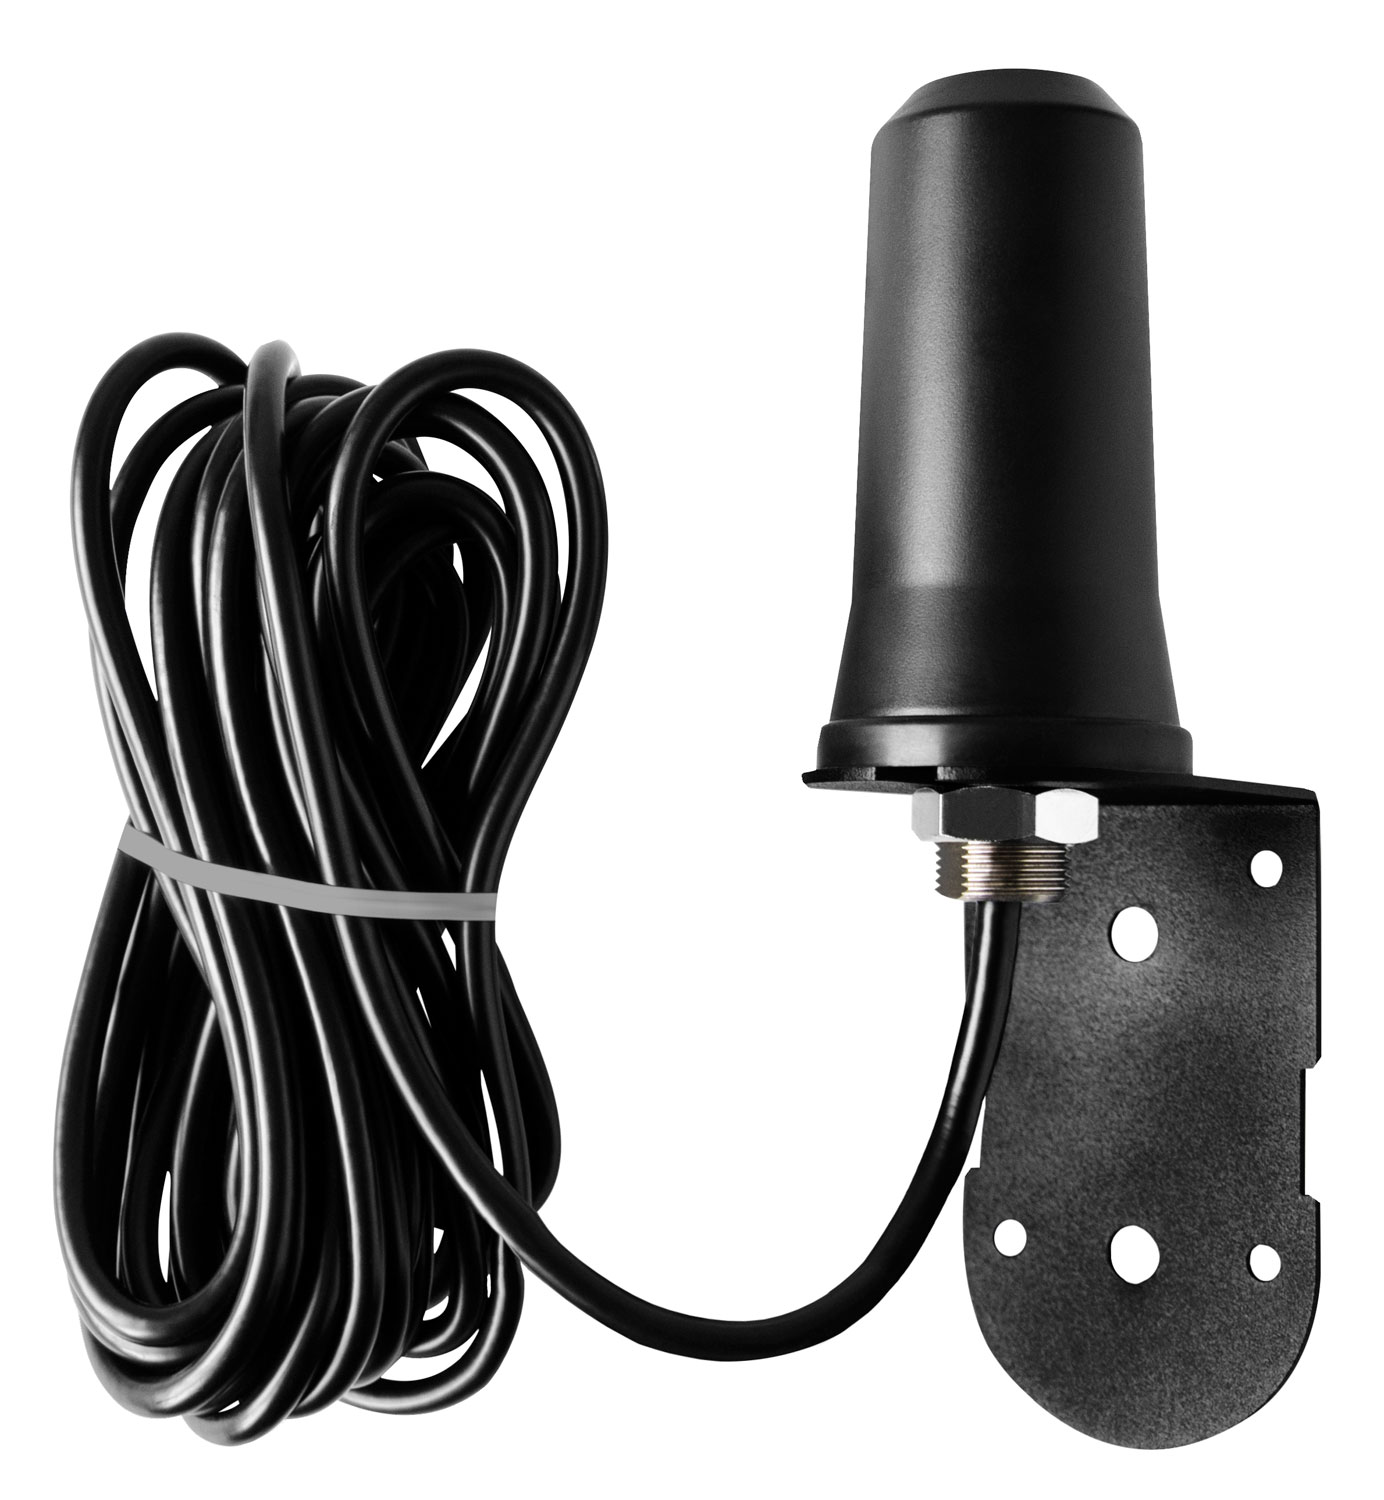 Spypoint CA01 Long Range Cellular Antenna Compatible With Most Cellular Trail Cameras Black